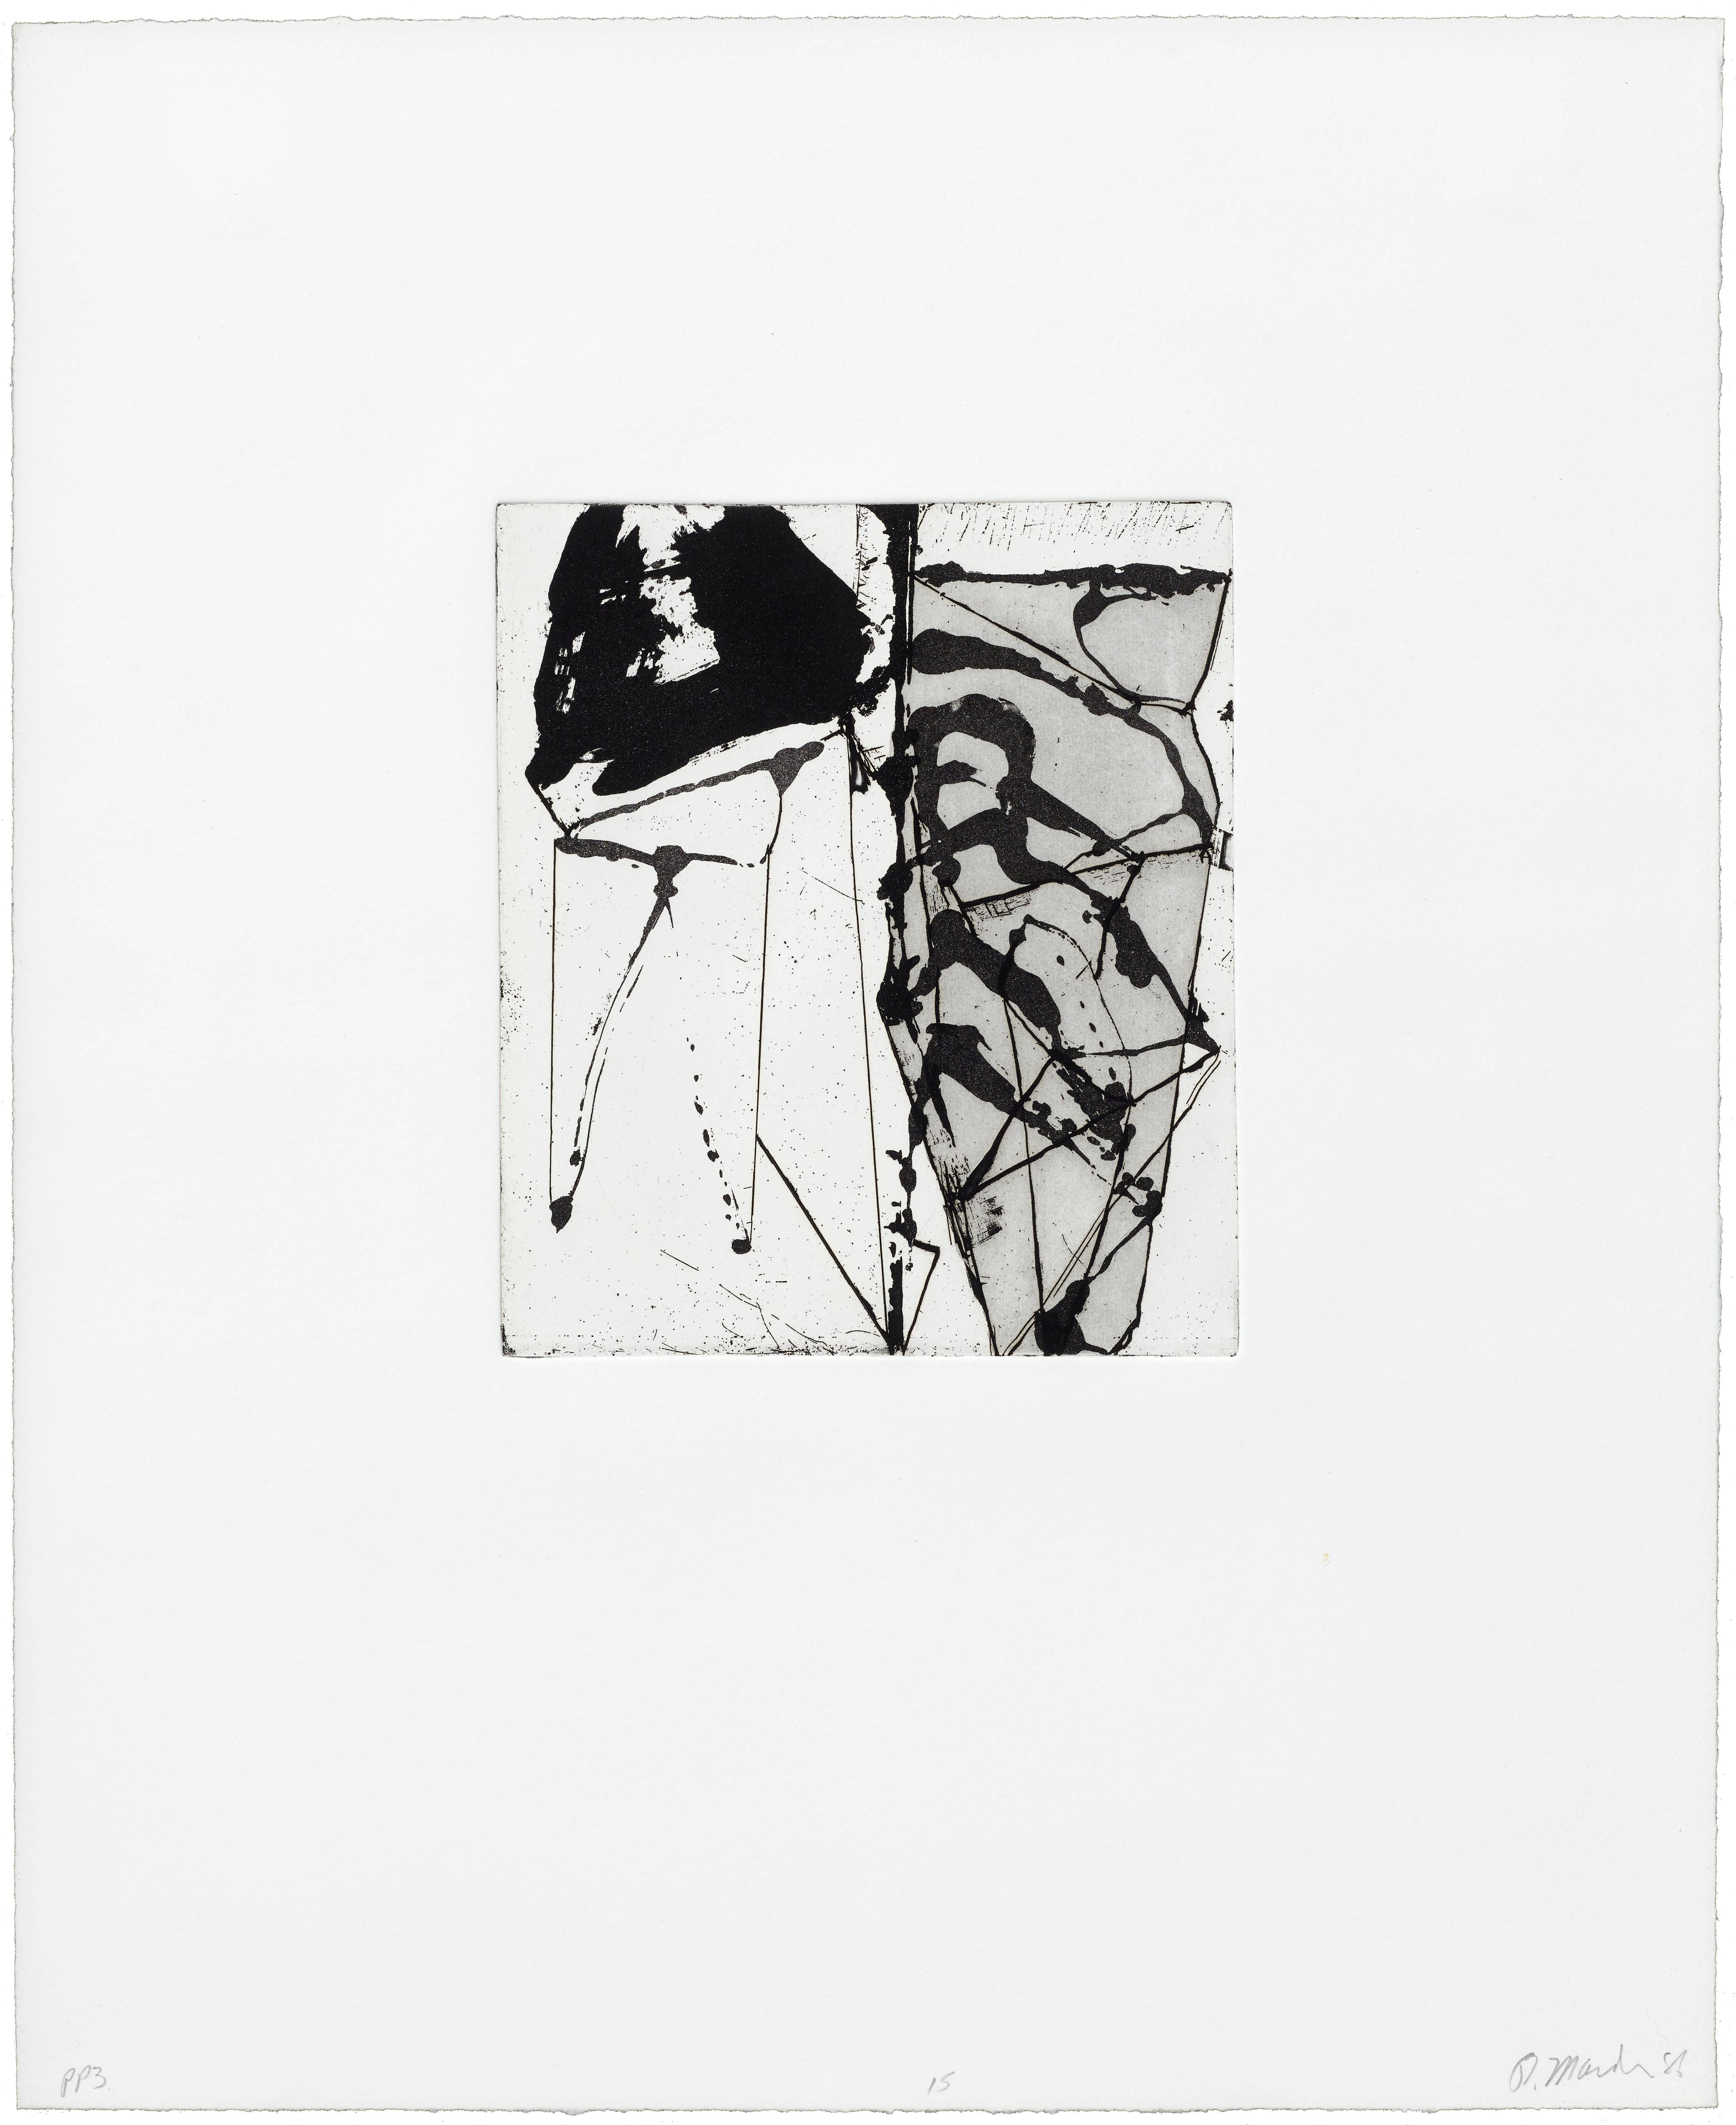 Etchings to Rexroth #15 - Print by Brice Marden